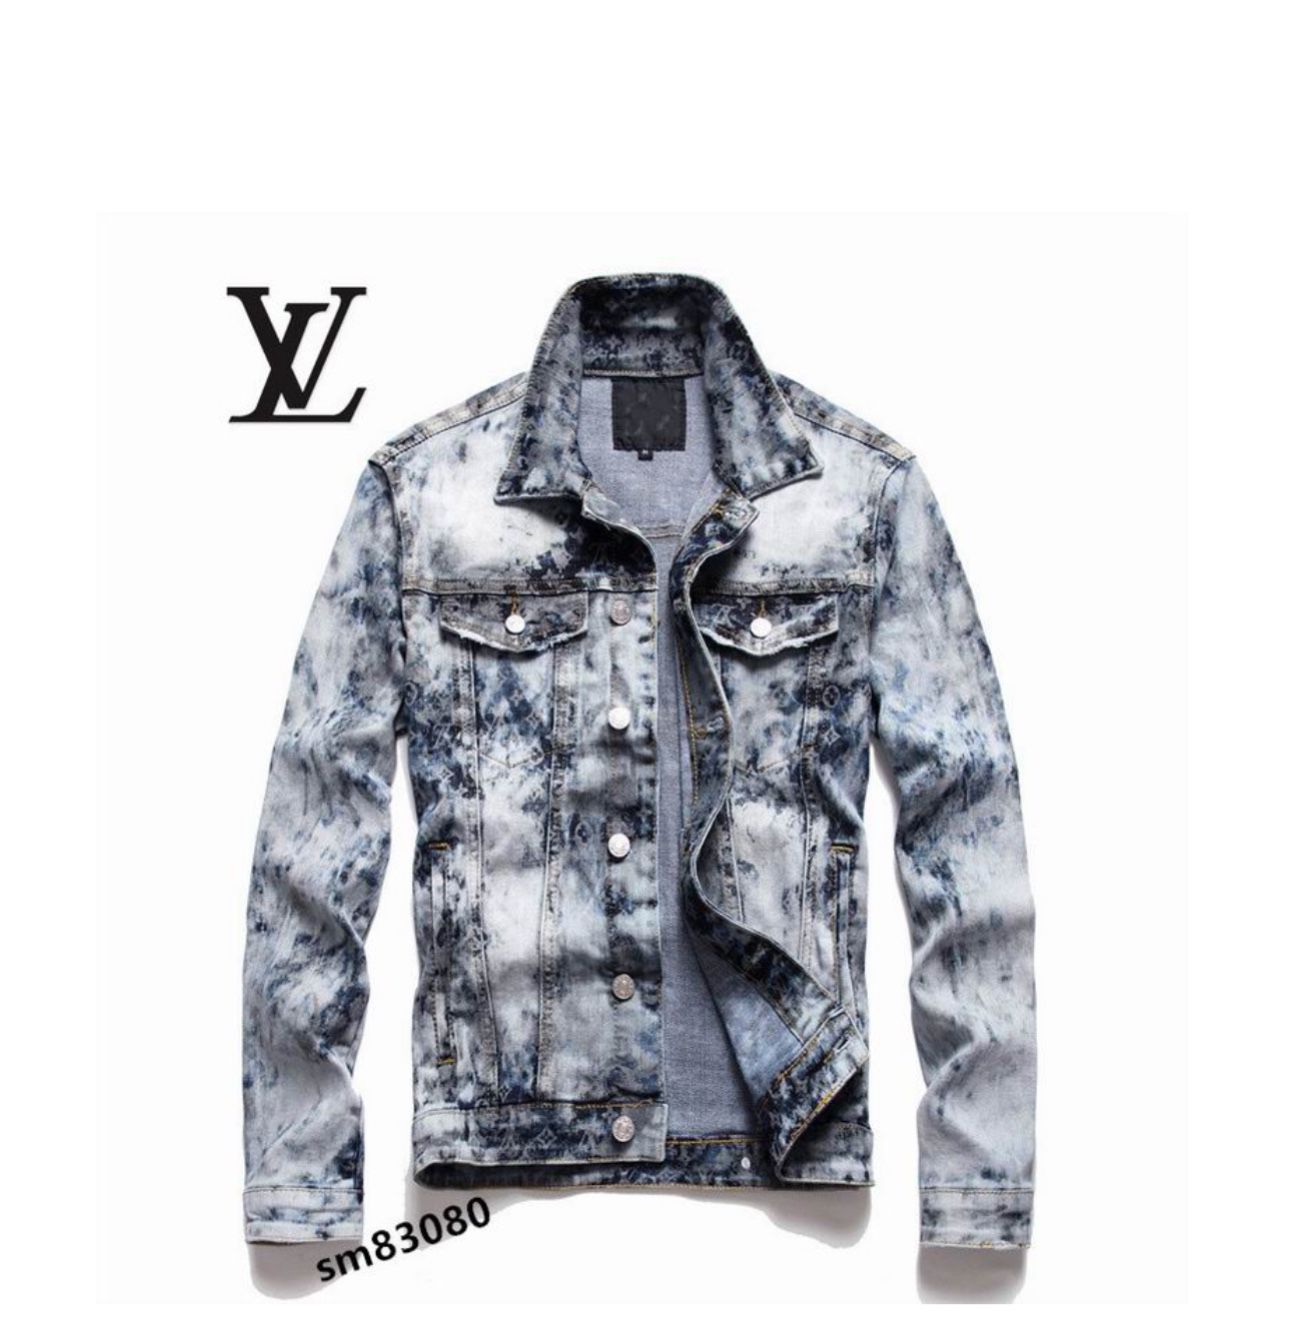 LV Jean Jacket Logo Embroided 1:1 Size m And L